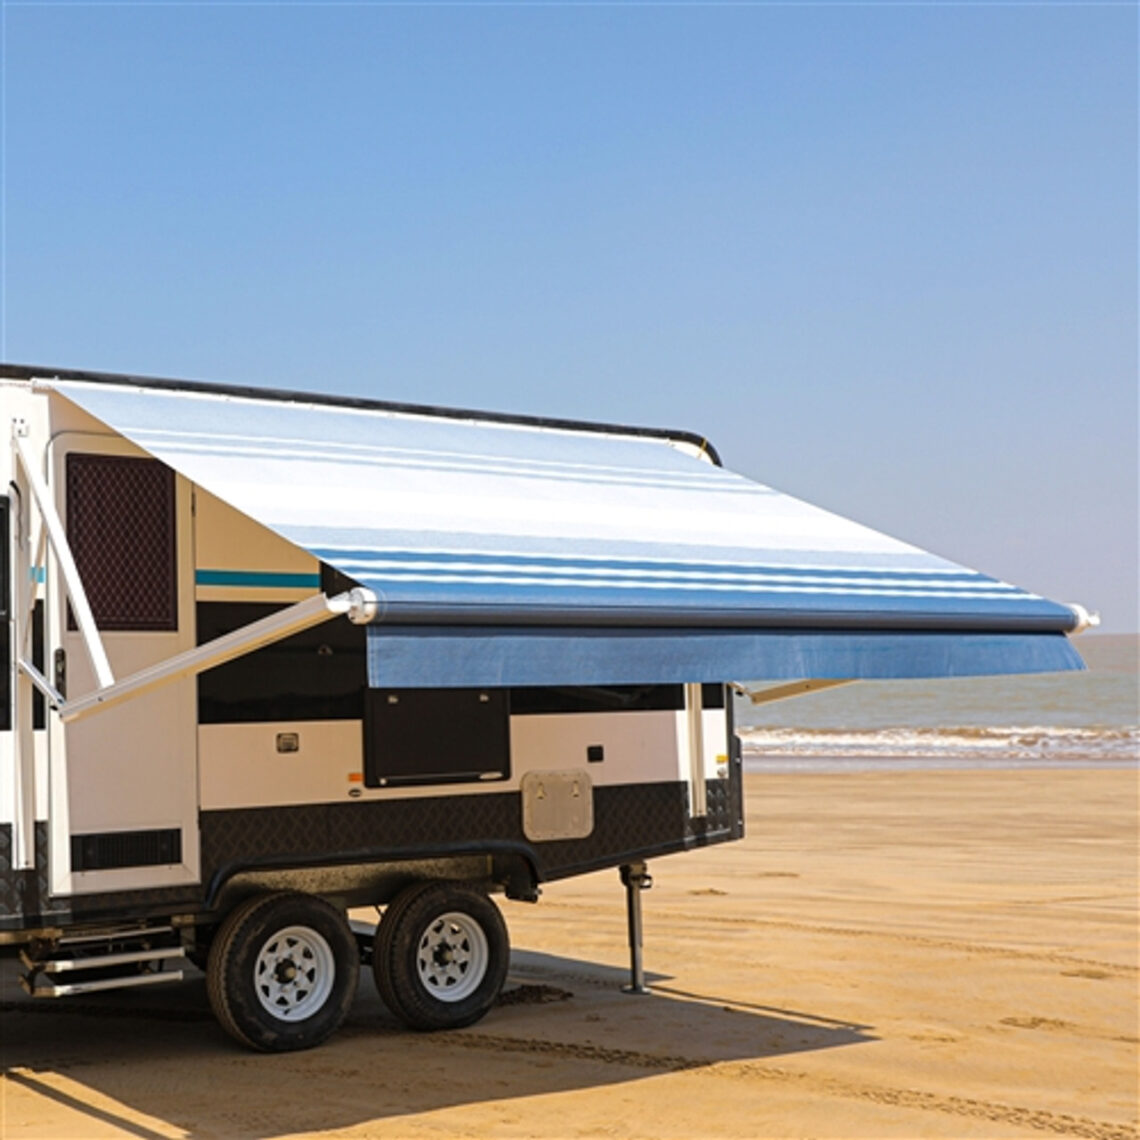 How to Clean an RV Awning